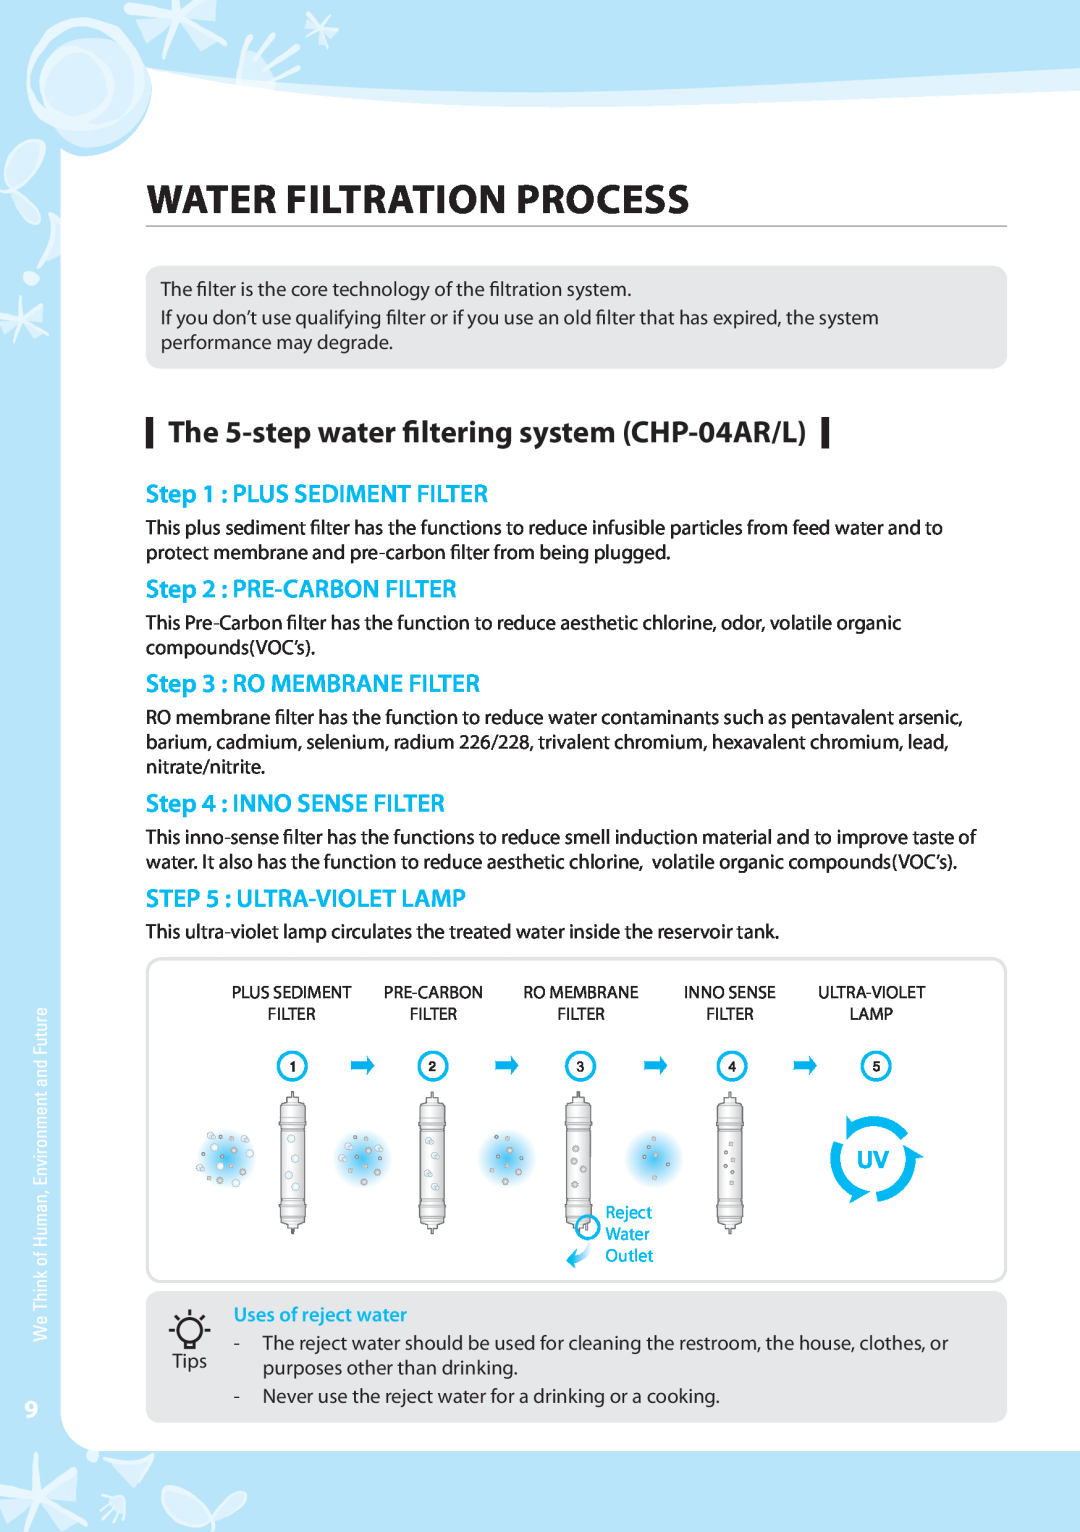 Coway CHP-04AU, CHP-04AL Water filtration process, The 5-step water filtering system CHP-04AR/L, Plus Sediment Filter 